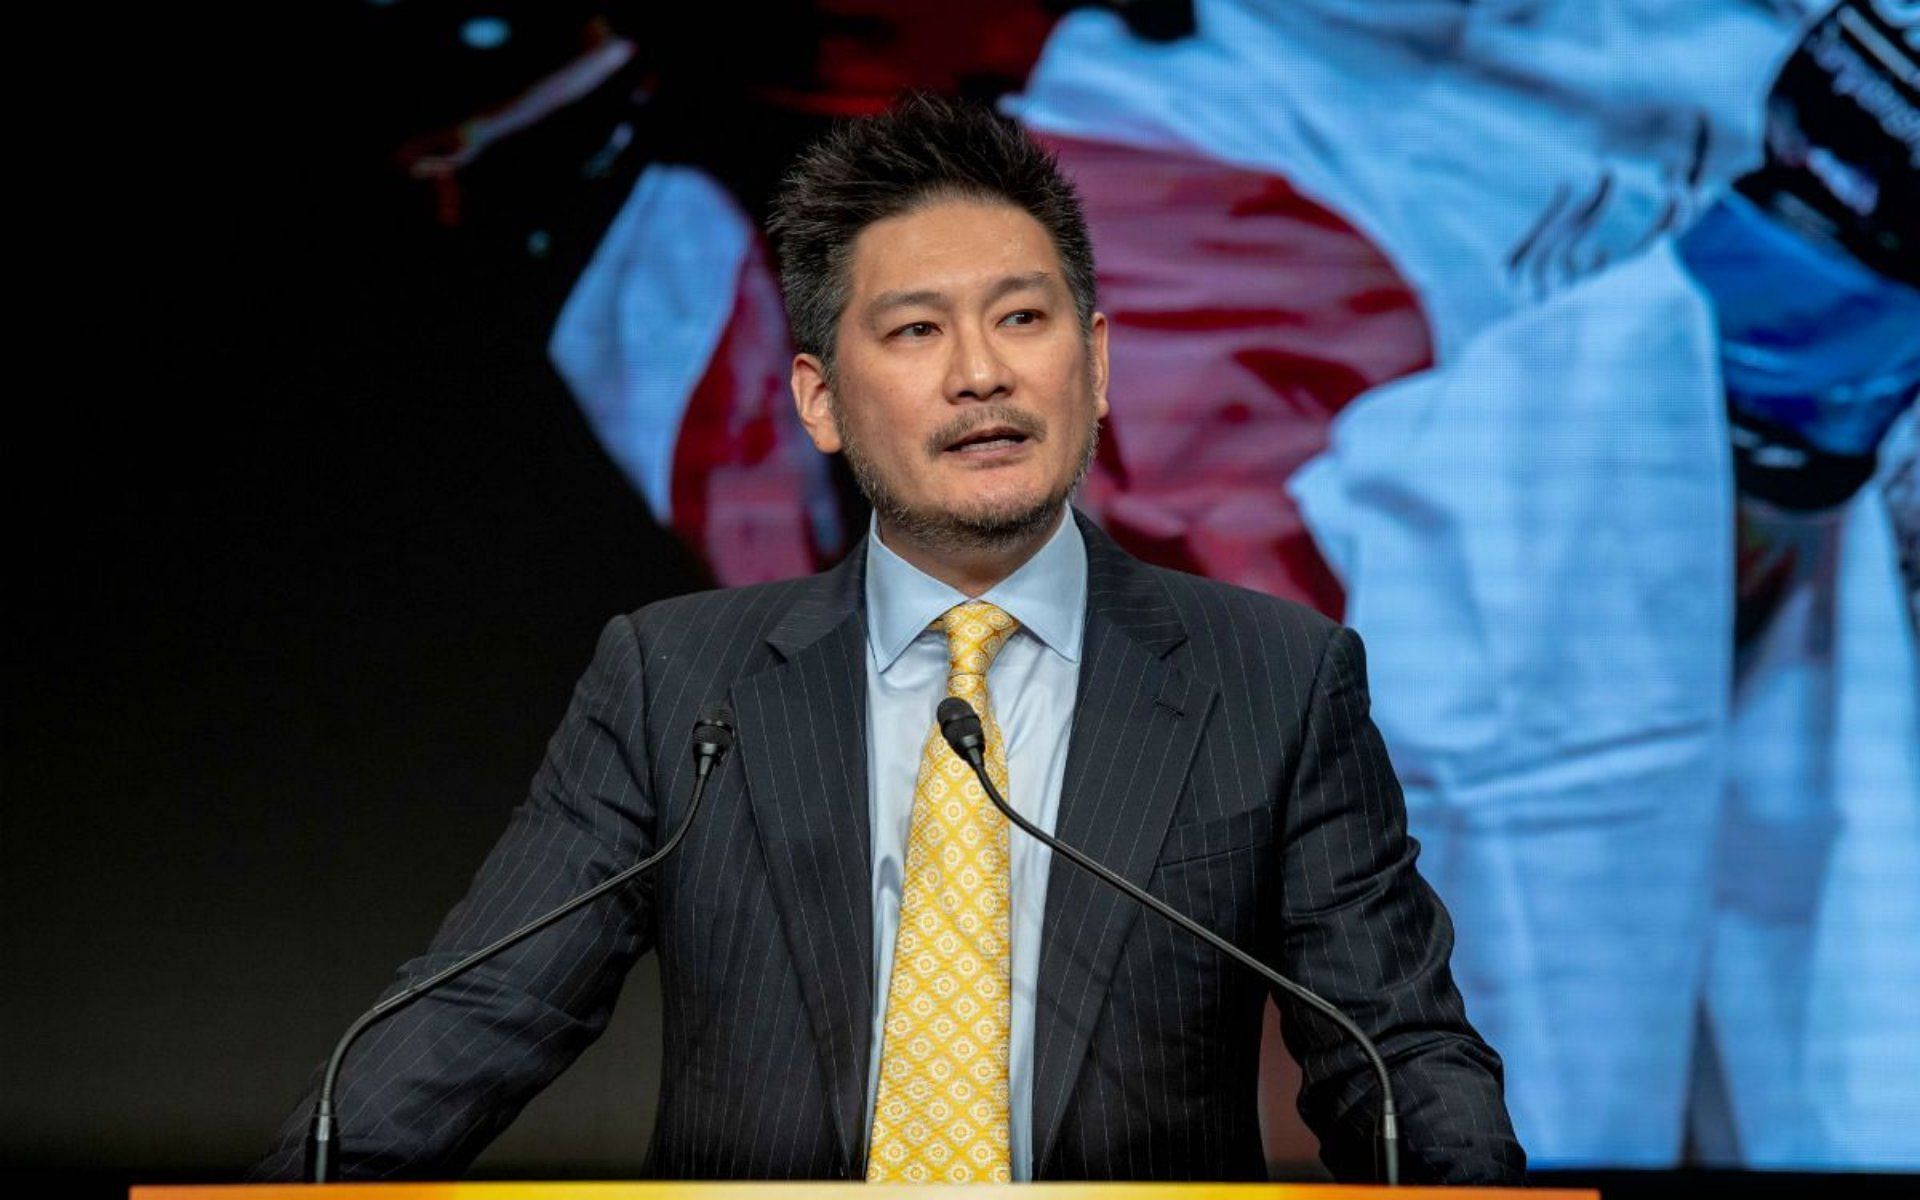 ONE Championship CEO Chatri Sityodtong believes 10th anniversary card ONE X is just the beginning for the promotion. Photo courtesy of ONE Championship